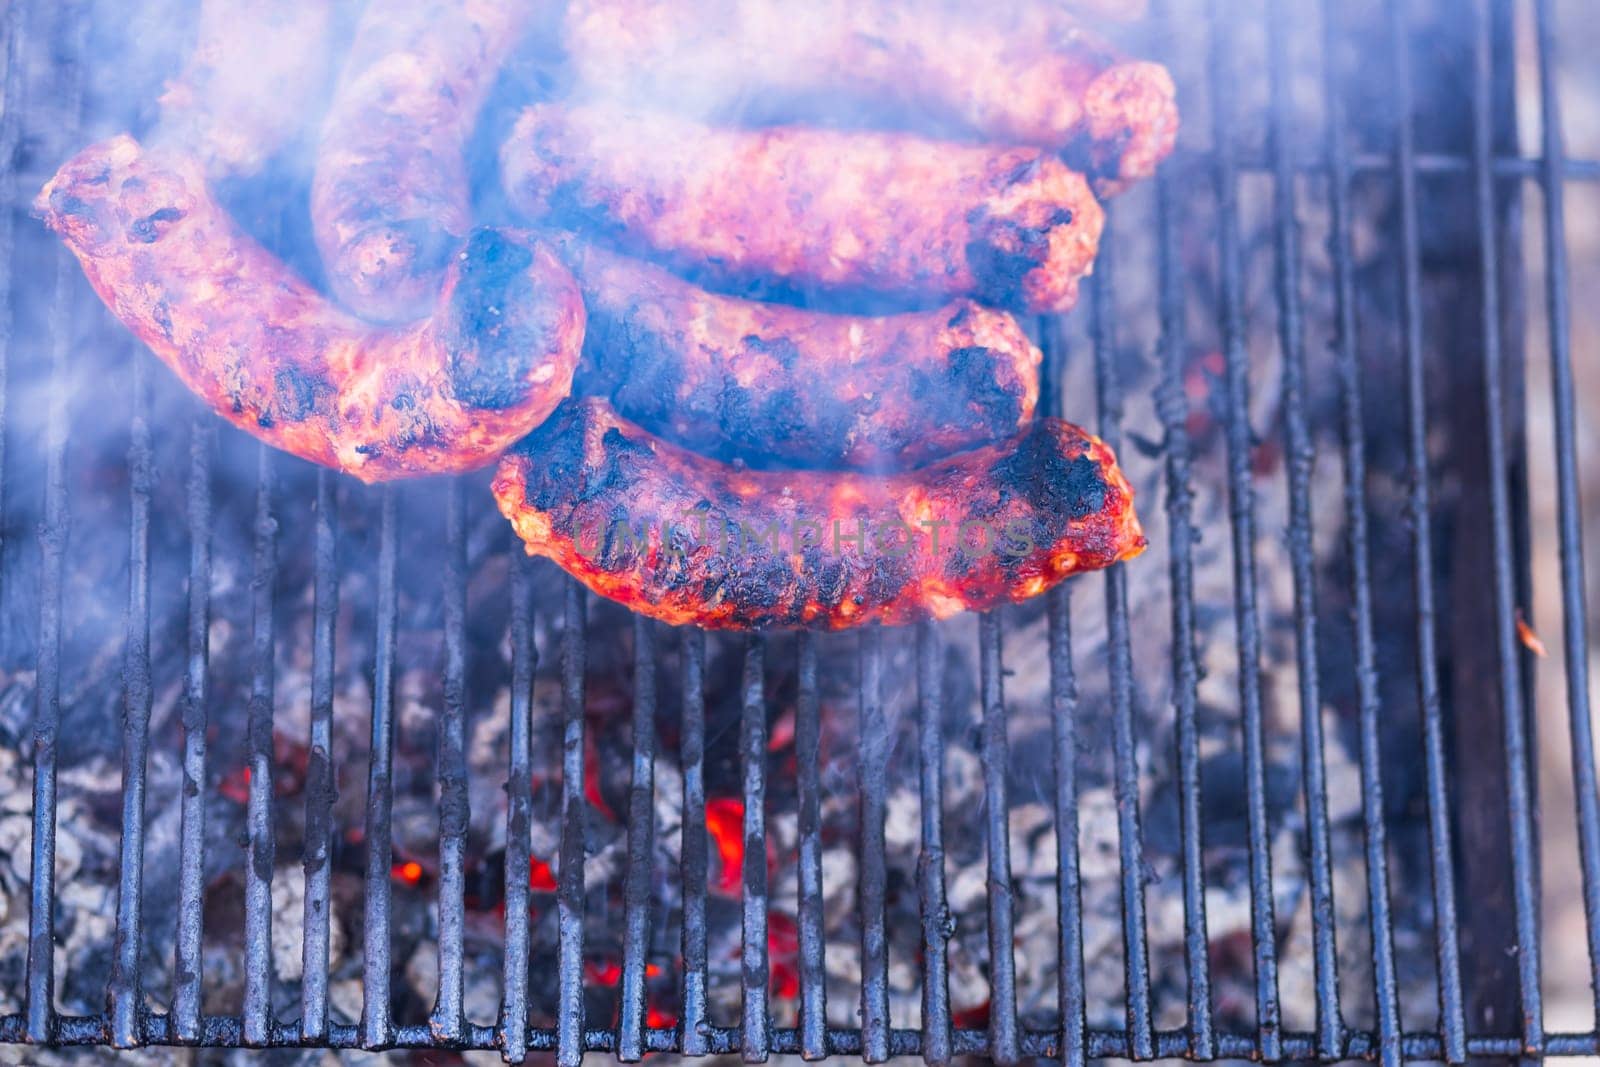 Sausages grilled on a charcoal barbeque. Top view of tasty barbecue, food concept, food on grill and detail of sausages on the grill